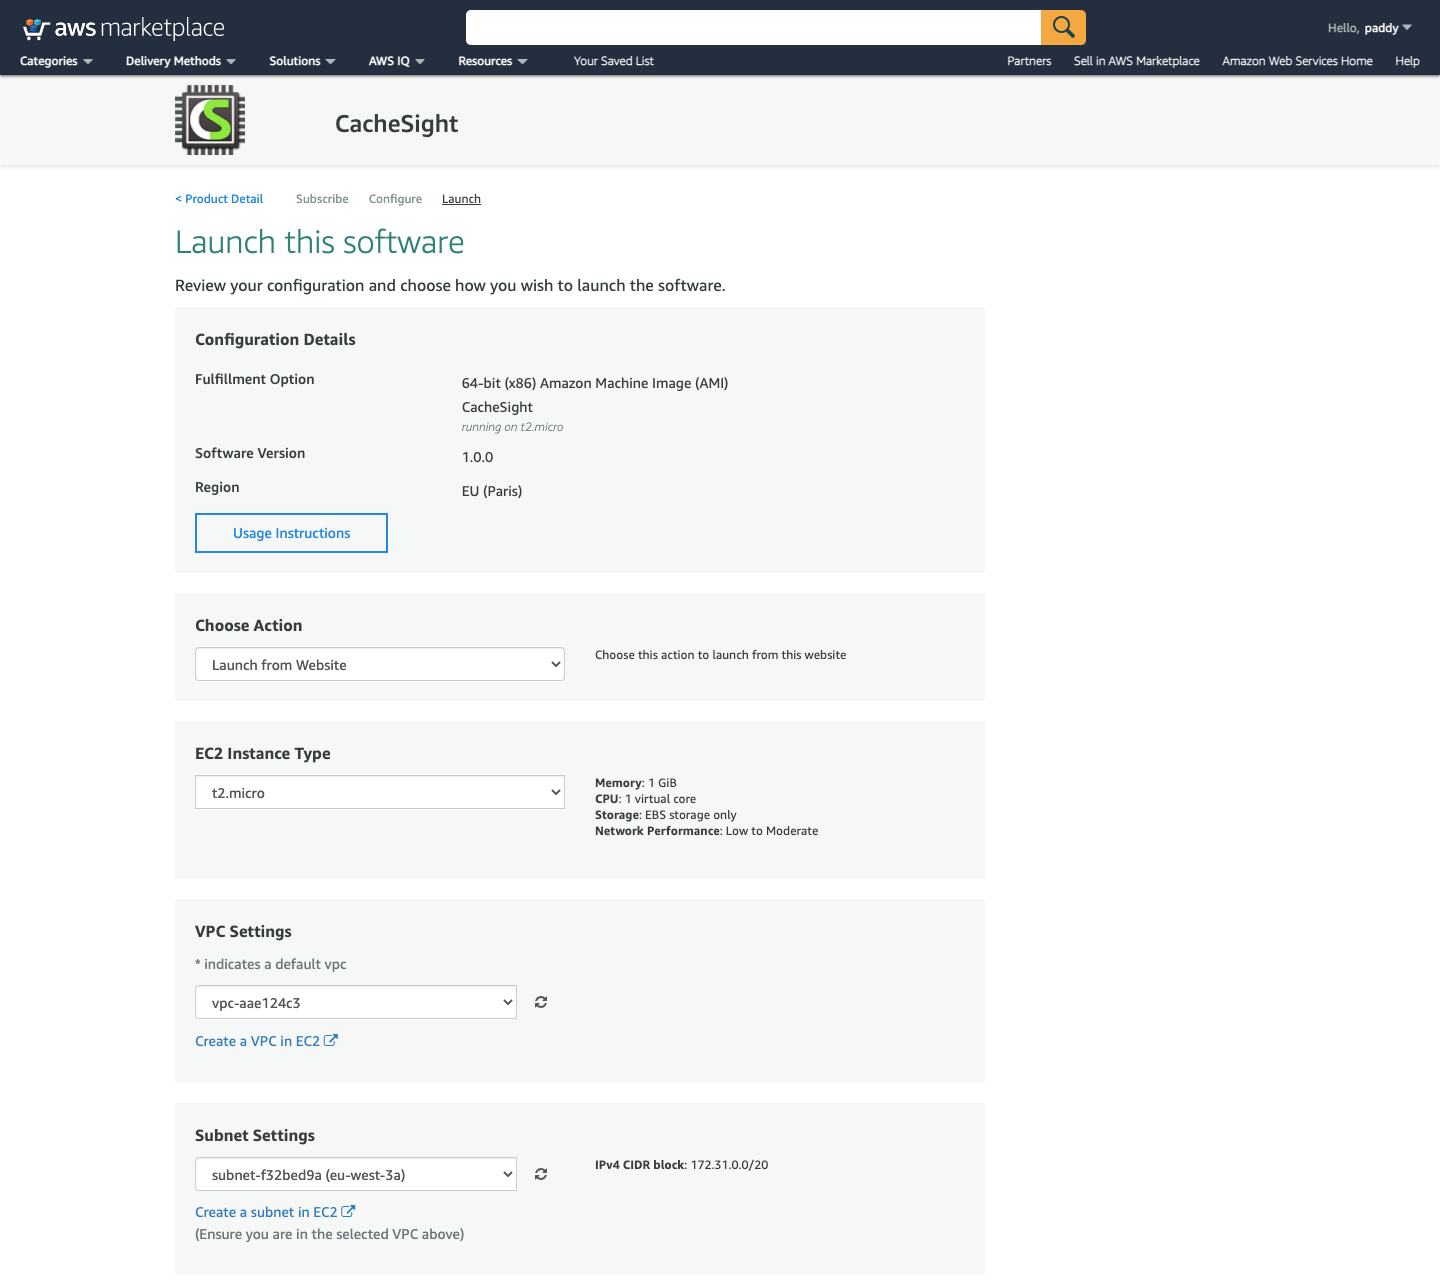 Screenshot of the CacheSight AWS Marketplace listing launch configuration